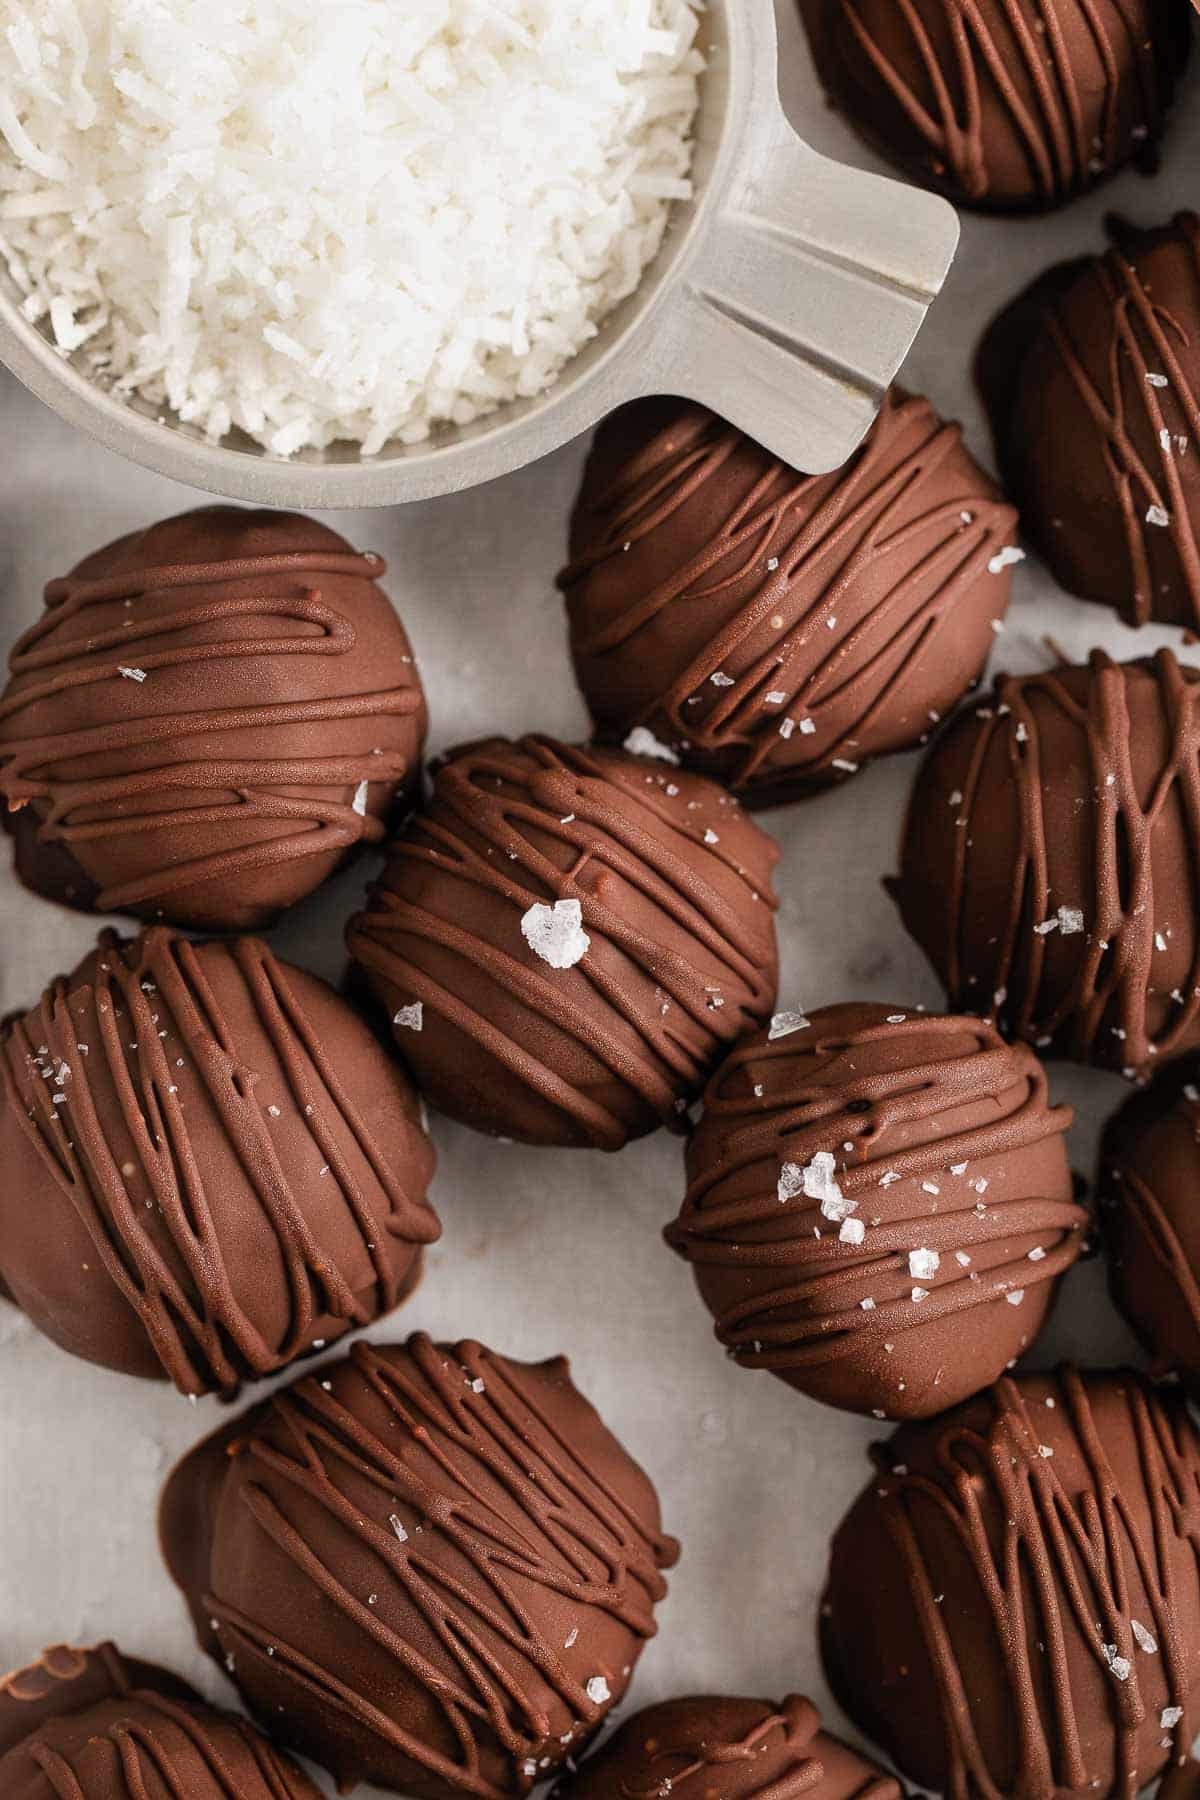 closeup of chocolate covered coconut balls drizzled with extra chocolate.